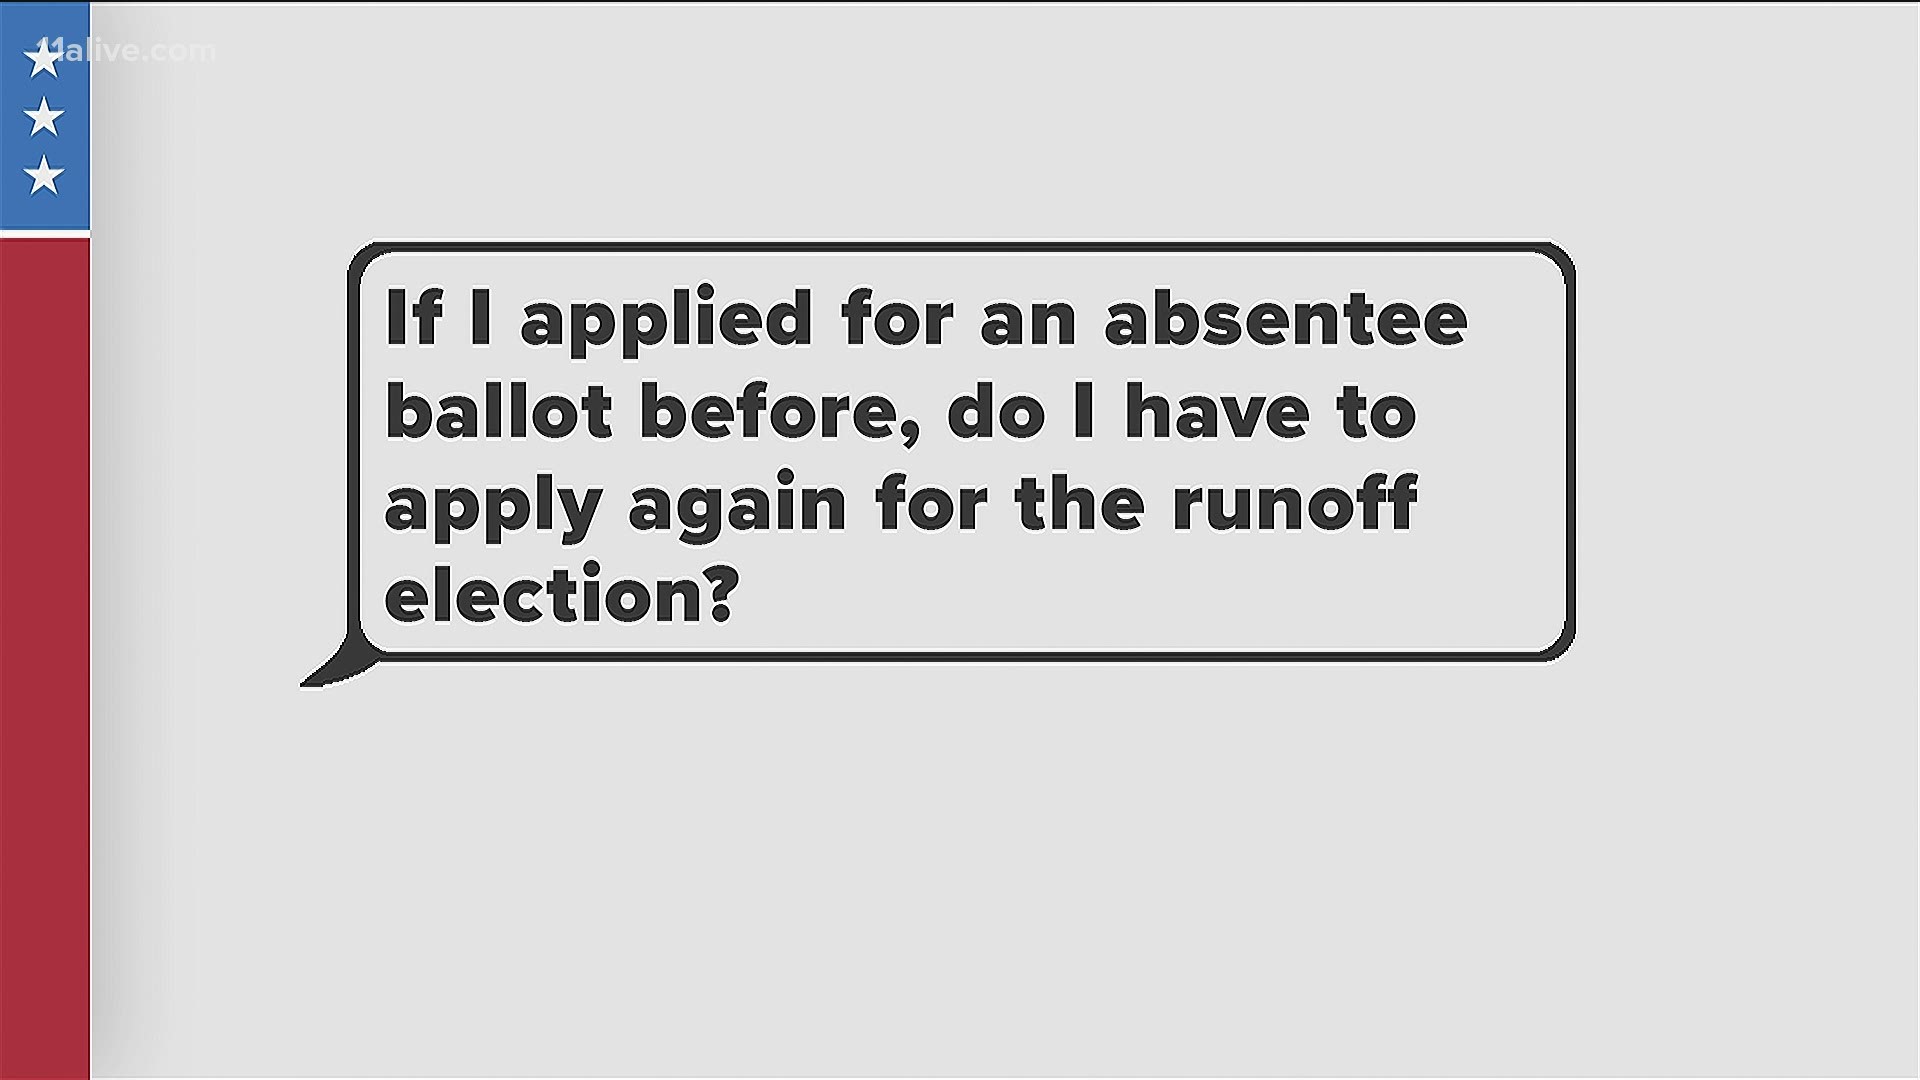 11Alive has been getting some questions about absentee ballots and the Senate runoffs.